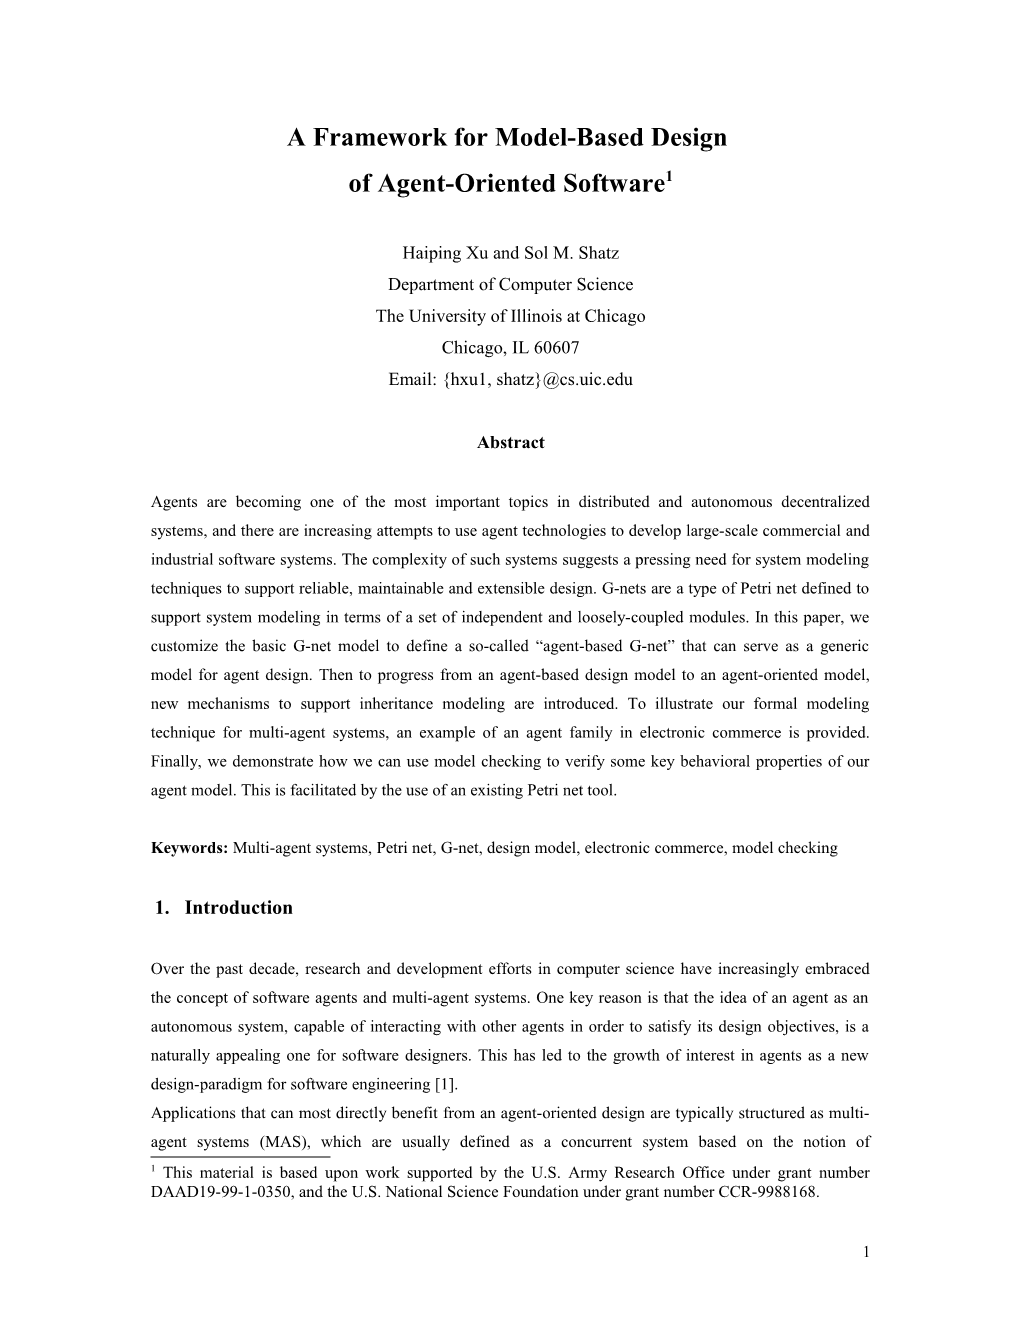 An Agent-Based G-Net Model for Seller and Buyer Design in Electronic Commerce